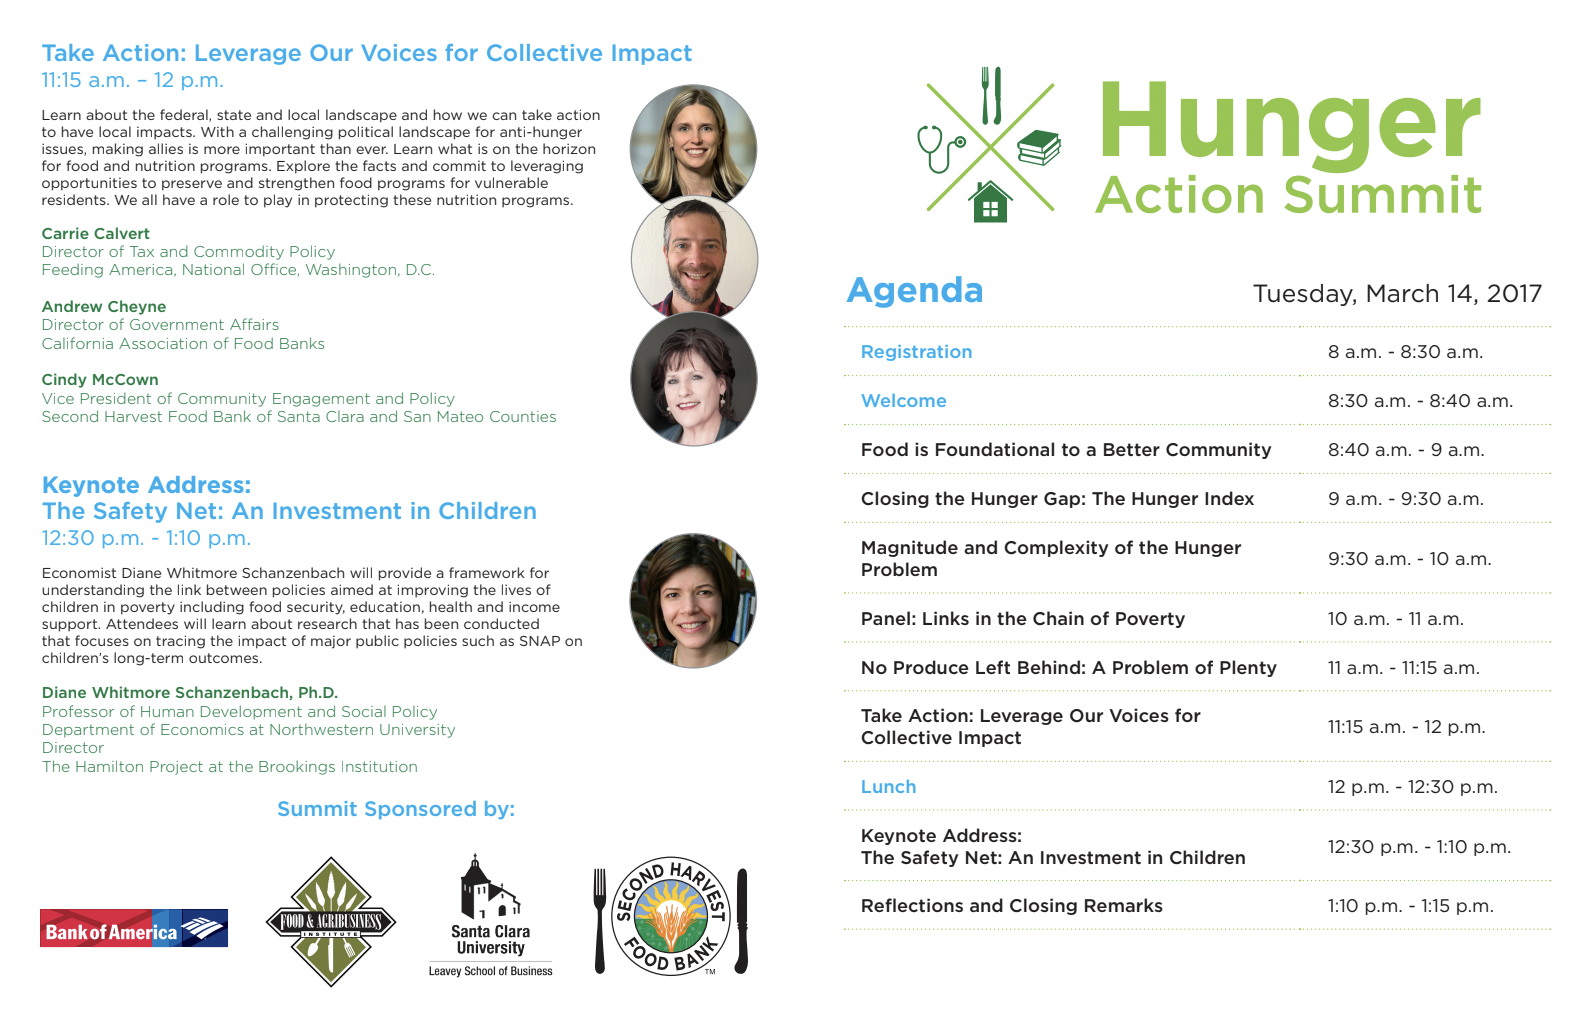 Hunger Action Summit 2017 event agenda image link to story